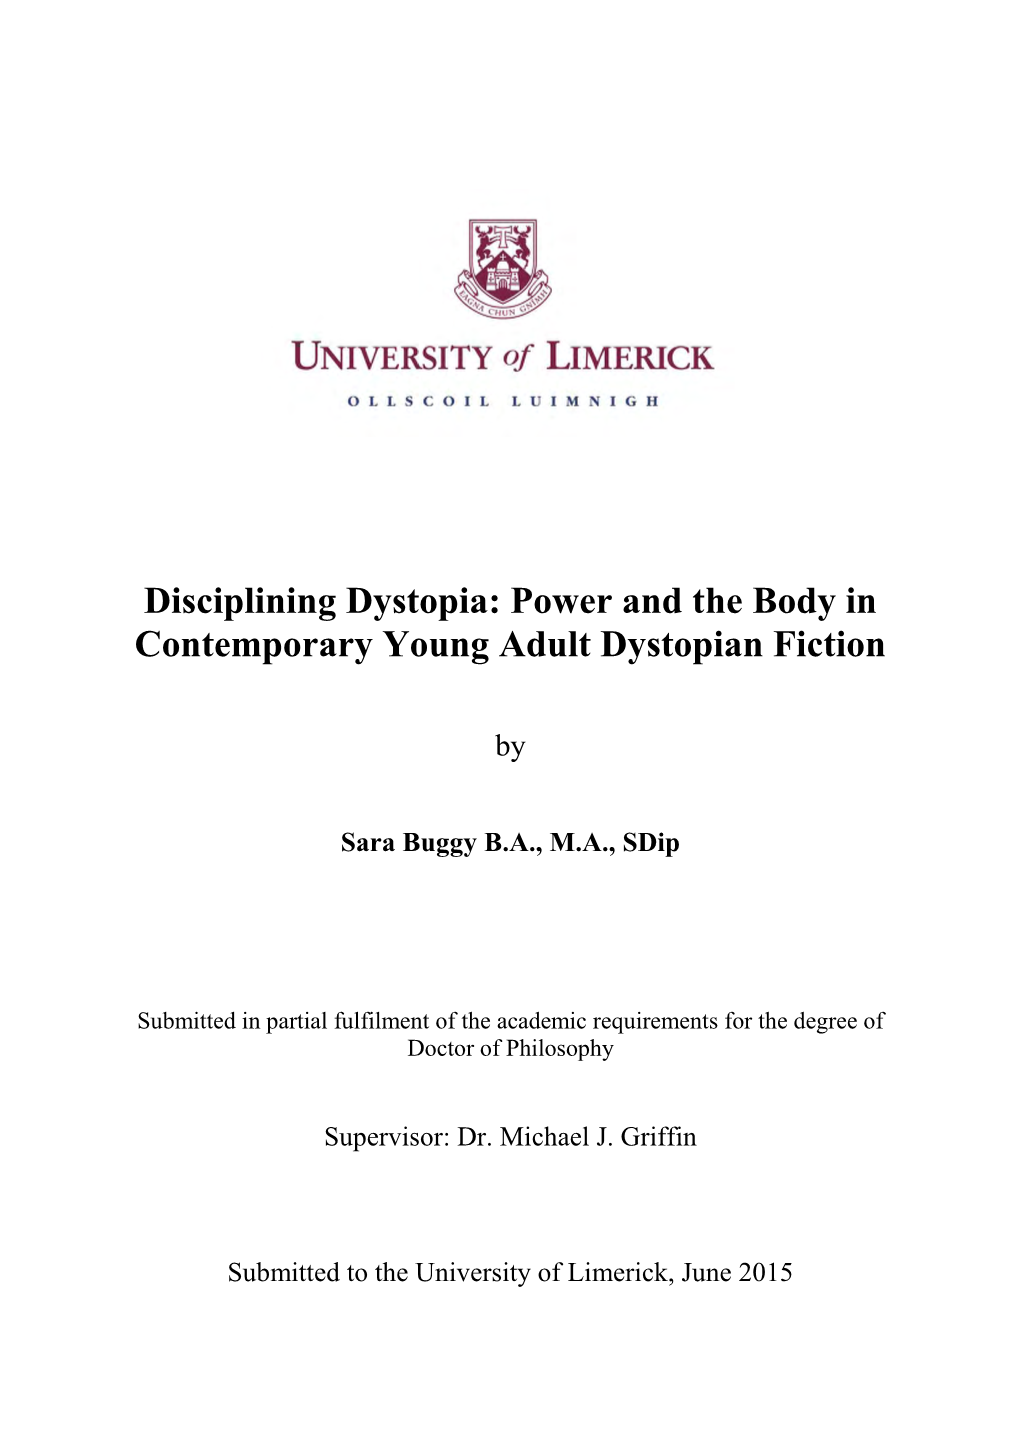 Disciplining Dystopia: Power and the Body in Contemporary Young Adult Dystopian Fiction